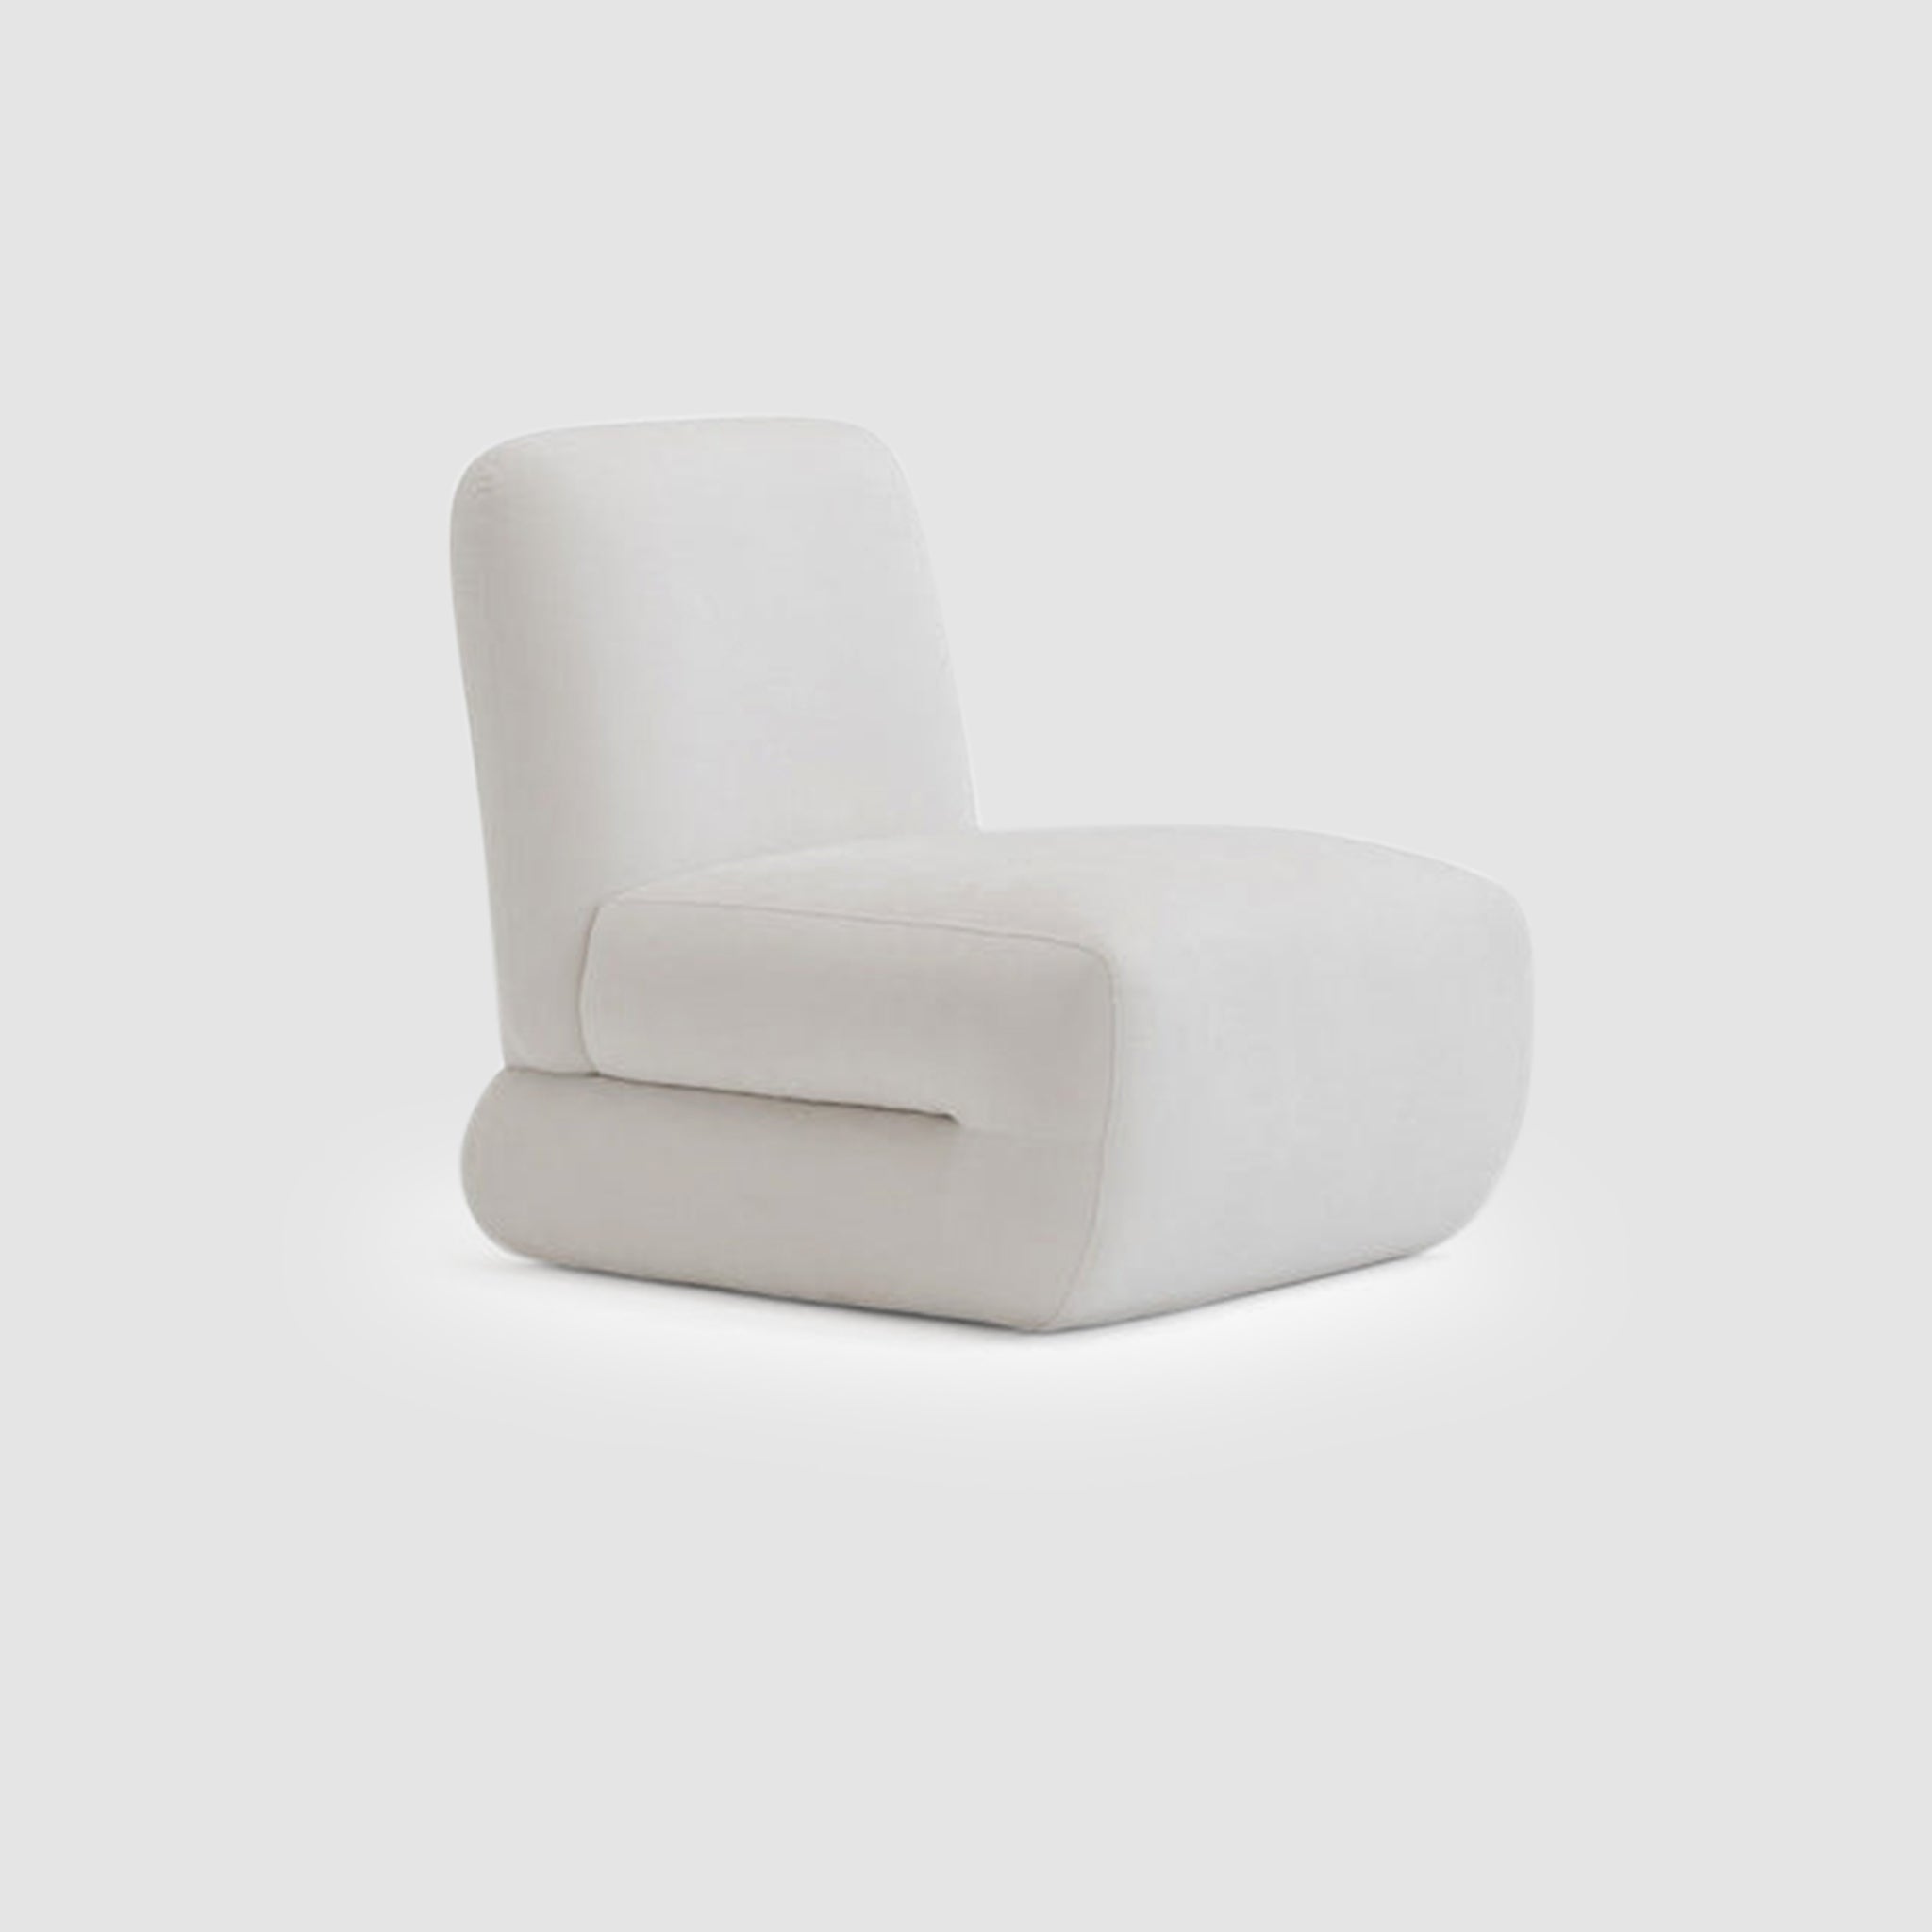 Front view of The Bopie Accent Chair in a soft, white-colored fabric, highlighting its plush and modern design.